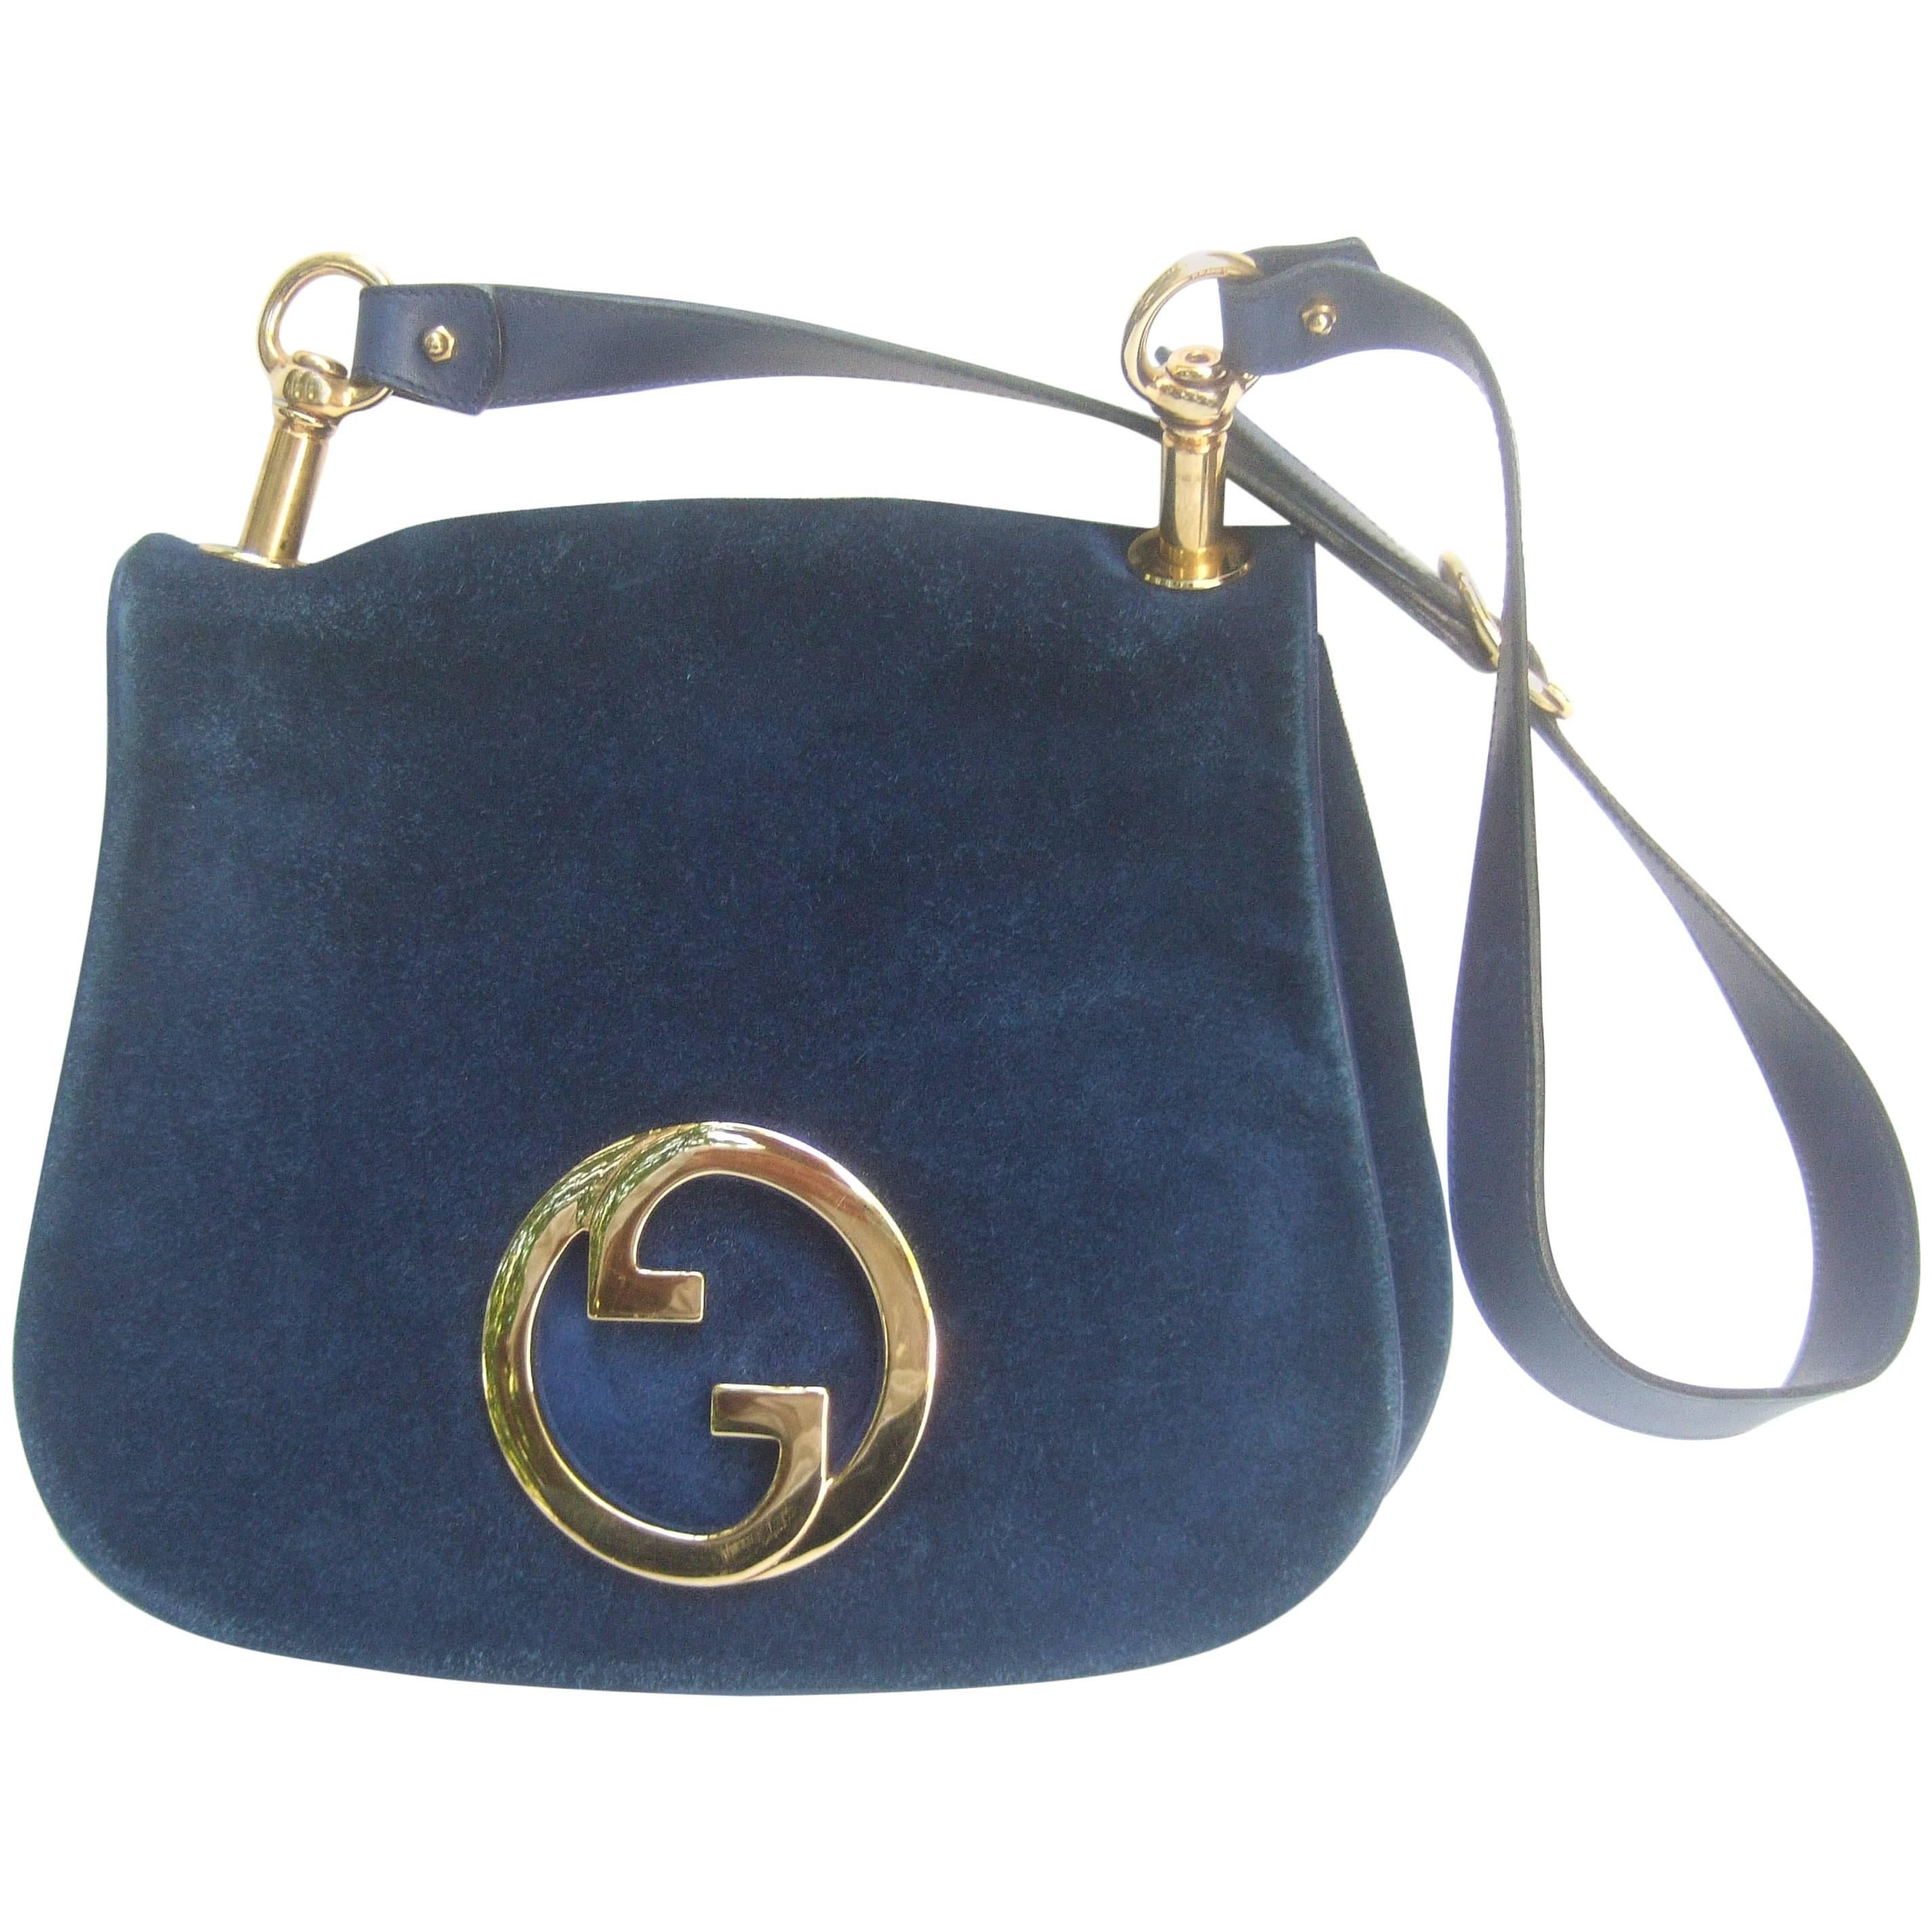 Gucci Italy Rare Midnight Blue Suede Shoulder Bag c 1970s